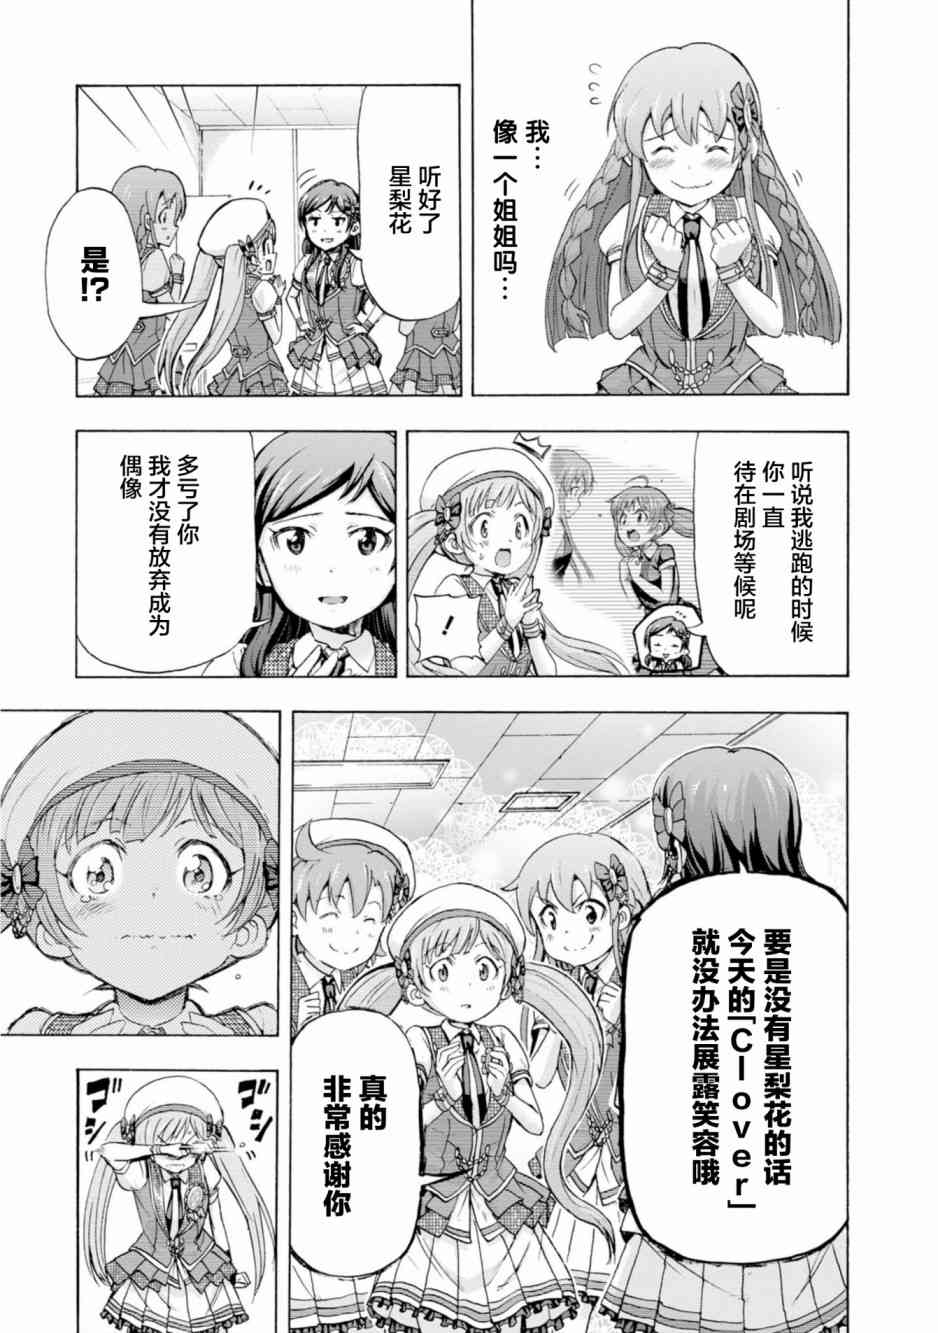 THE IDOLM@STER MILLION LIVE! Blooming Clover - 18話(1/2) - 1